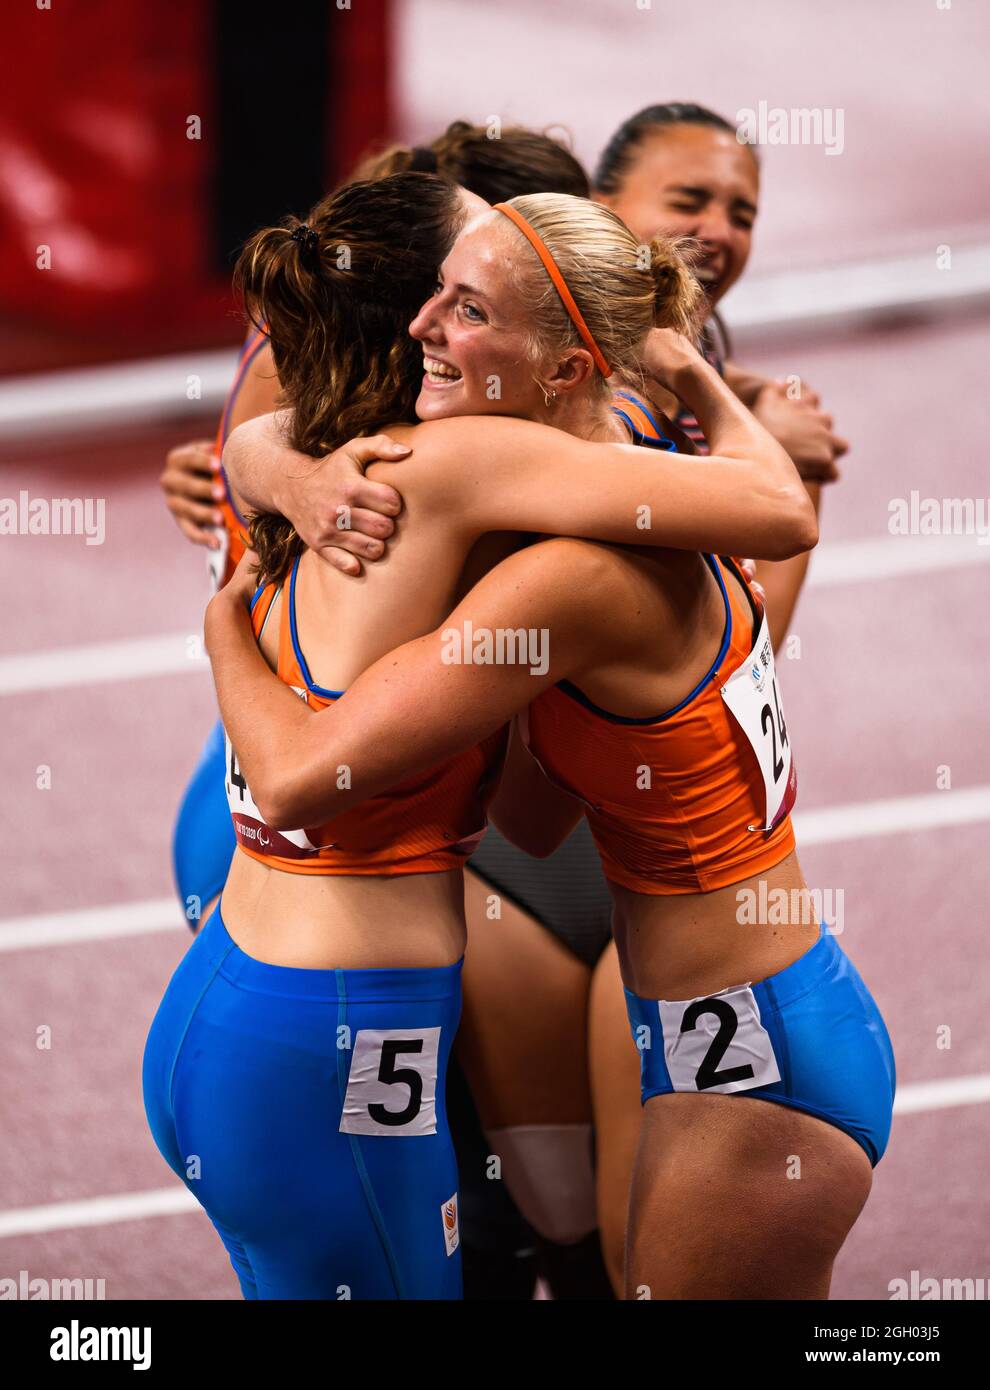 TOKYO, JAPAN. 03th Sep, 2021. (from left) Marlene van Gansewinkel (NED) and Kimberly Alkemade (NED) and Fleur Jong (NED) congratulate each other after competing in the WomenÕs 100m - T64 Final during Track and Field events - Tokyo 2020 Paralympic games at Olympic Stadium on Friday, September 03, 2021 in TOKYO, JAPAN. Credit: Taka G Wu/Alamy Live News Stock Photo